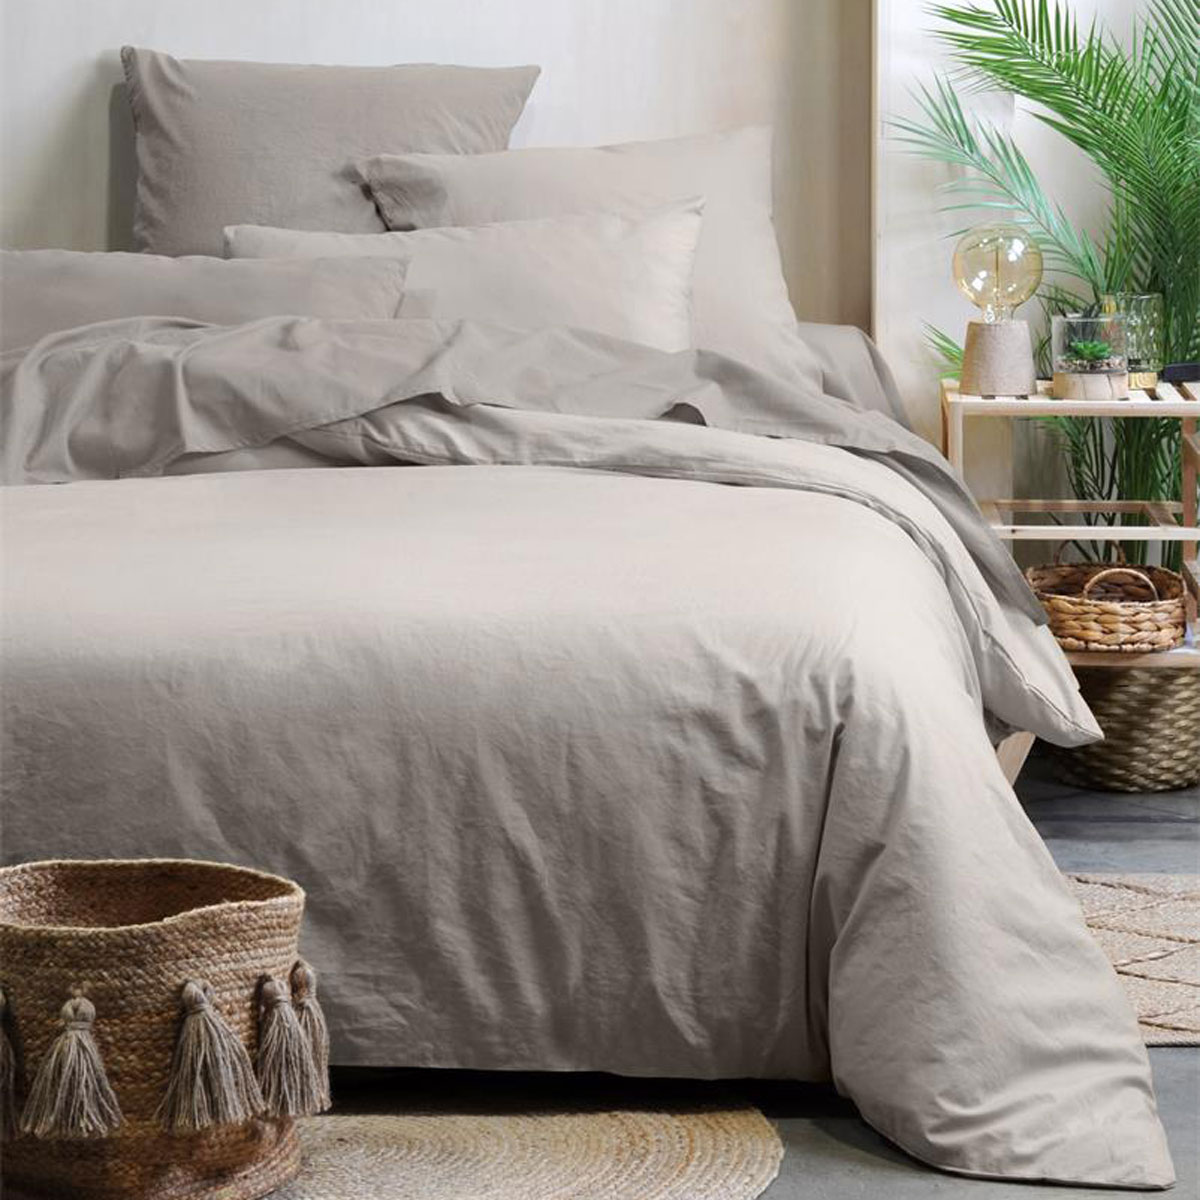 Organic cotton fitted sheet - Color Linen - Size 140 x 190 cm